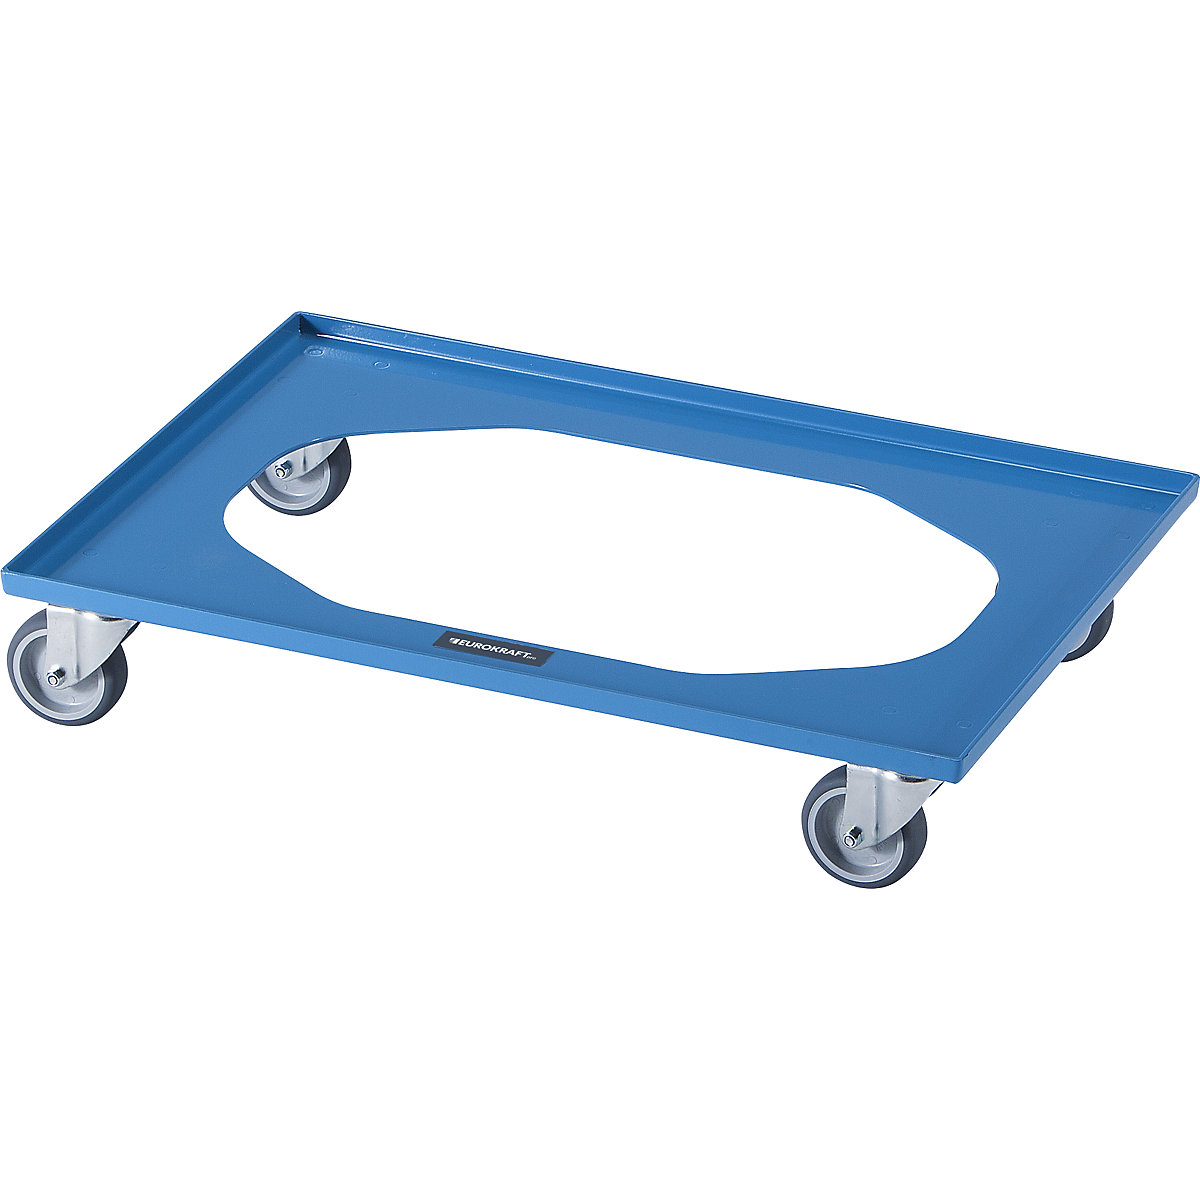 NEO transport dolly – eurokraft pro, for Euro formats 800 x 600 mm, max. load 250 kg, 5+ items-3